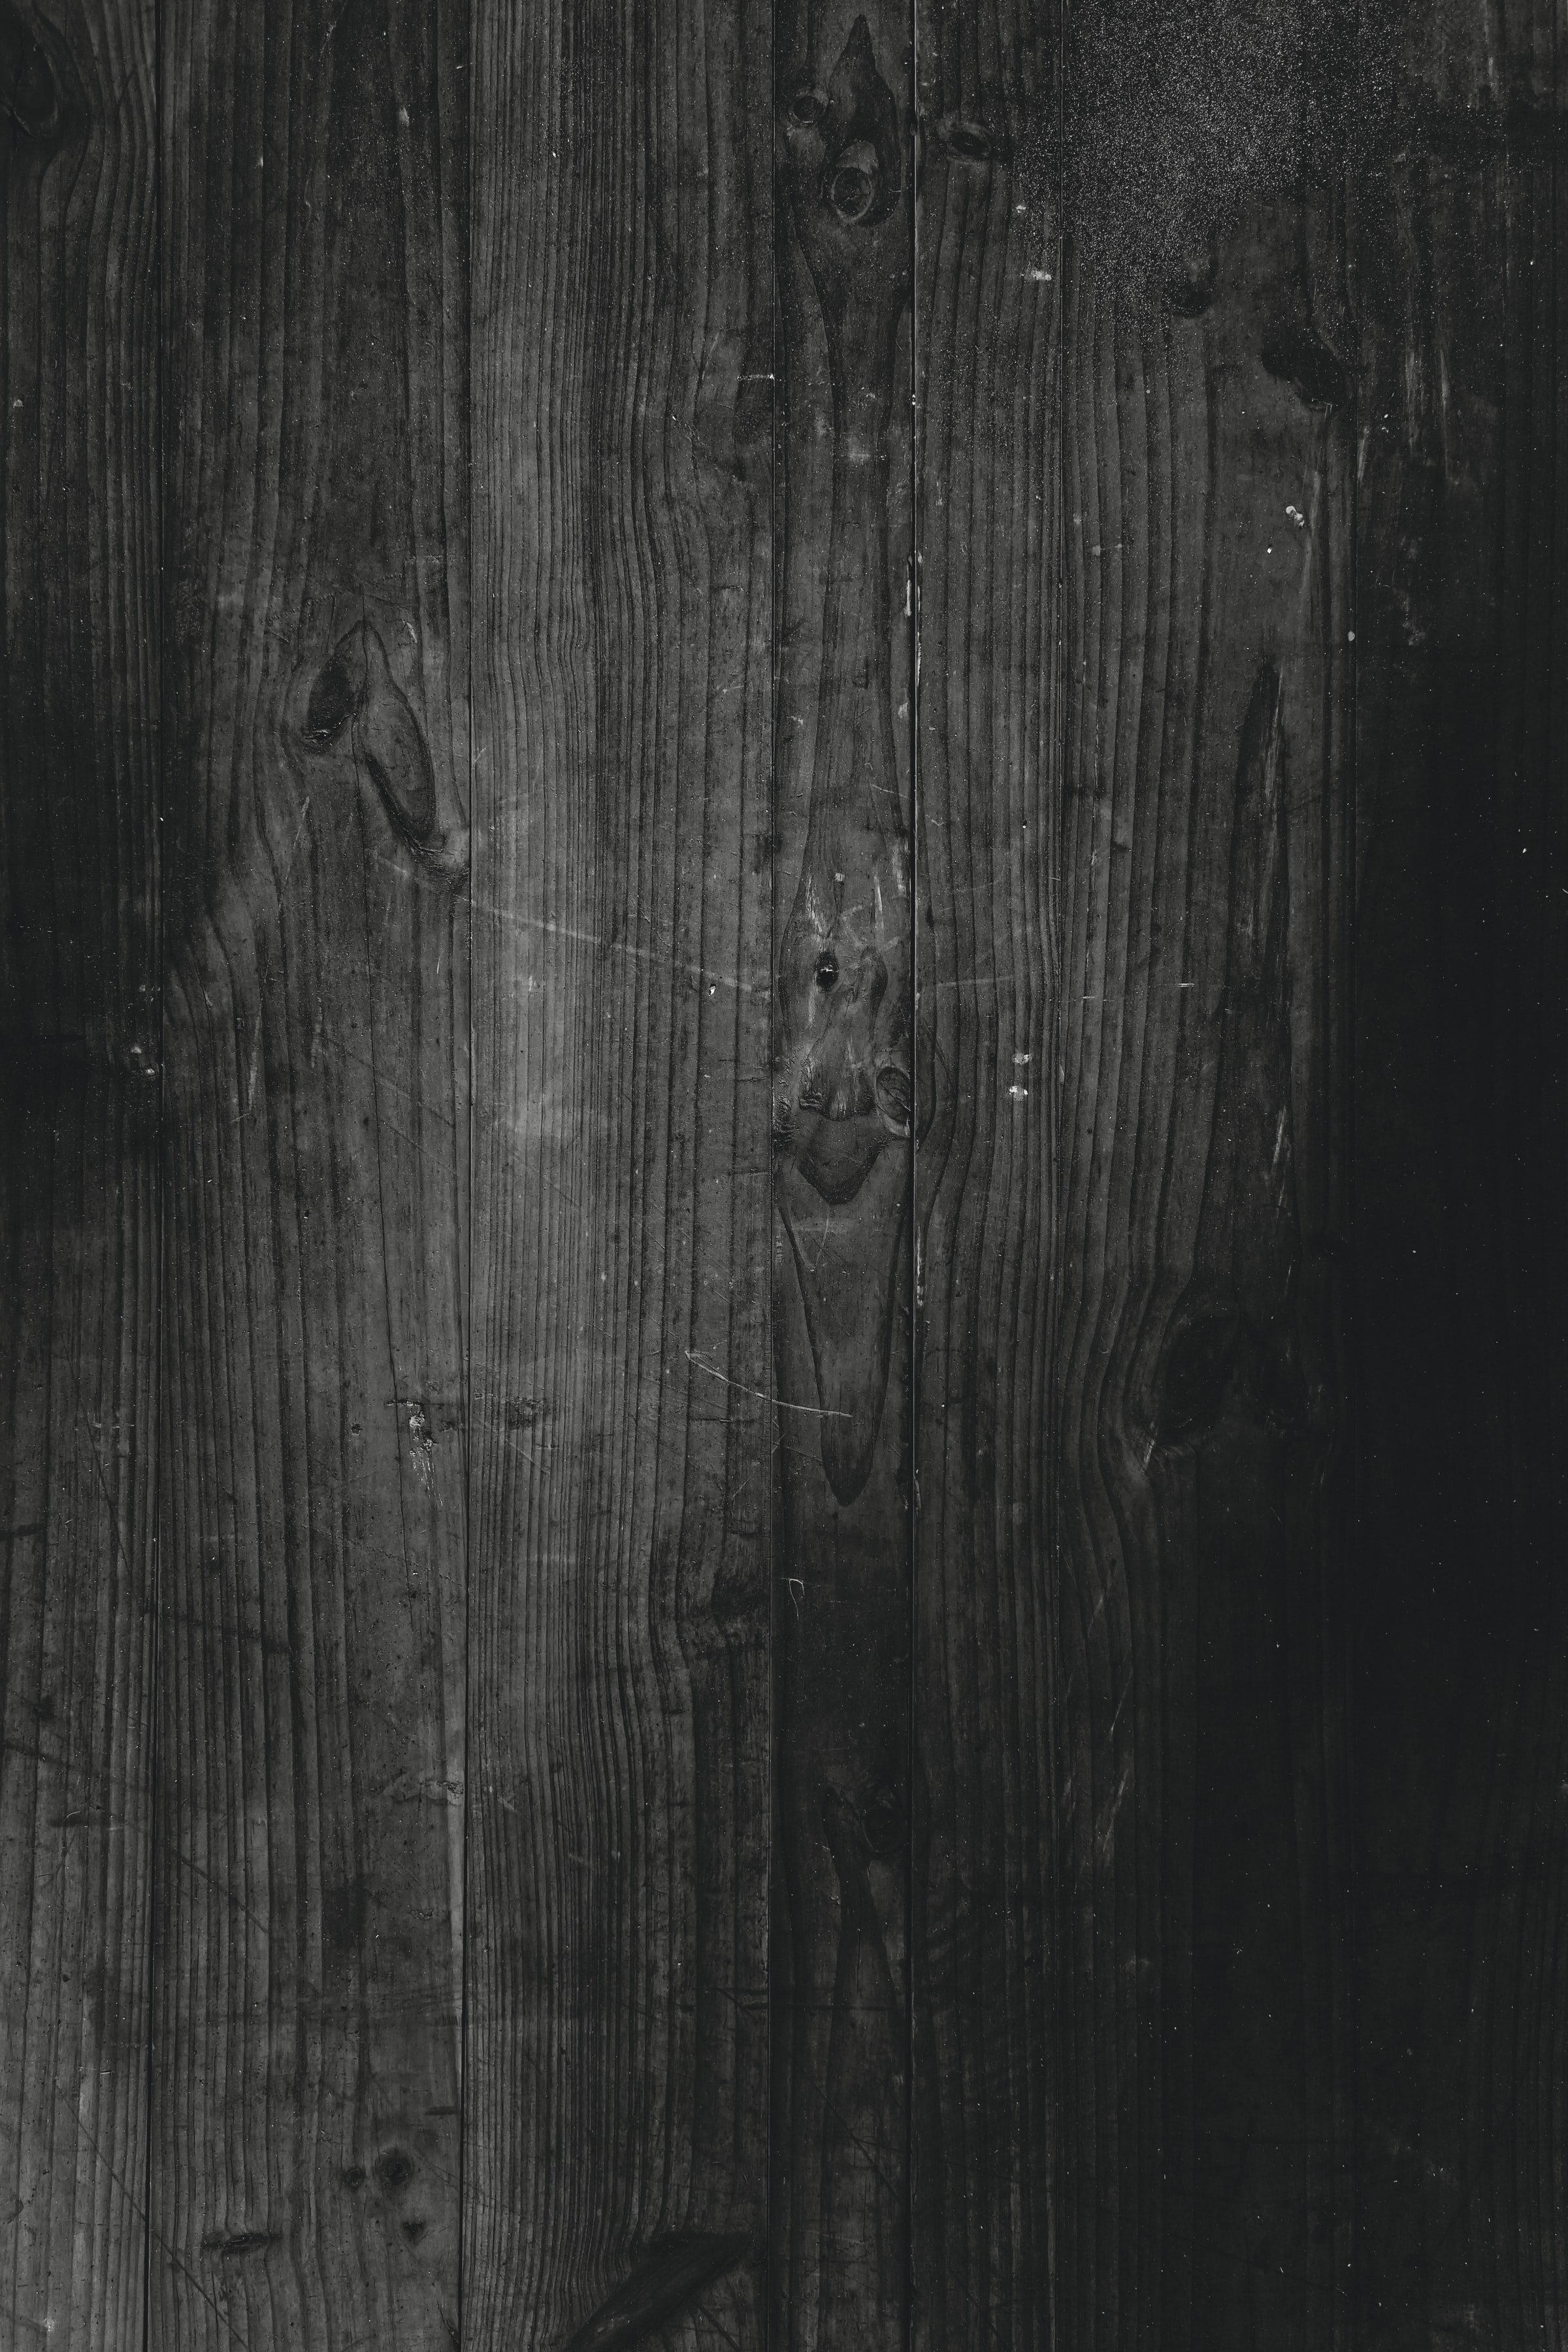 texture, wood, textures, wooden, bw, chb, planks, board for Windows